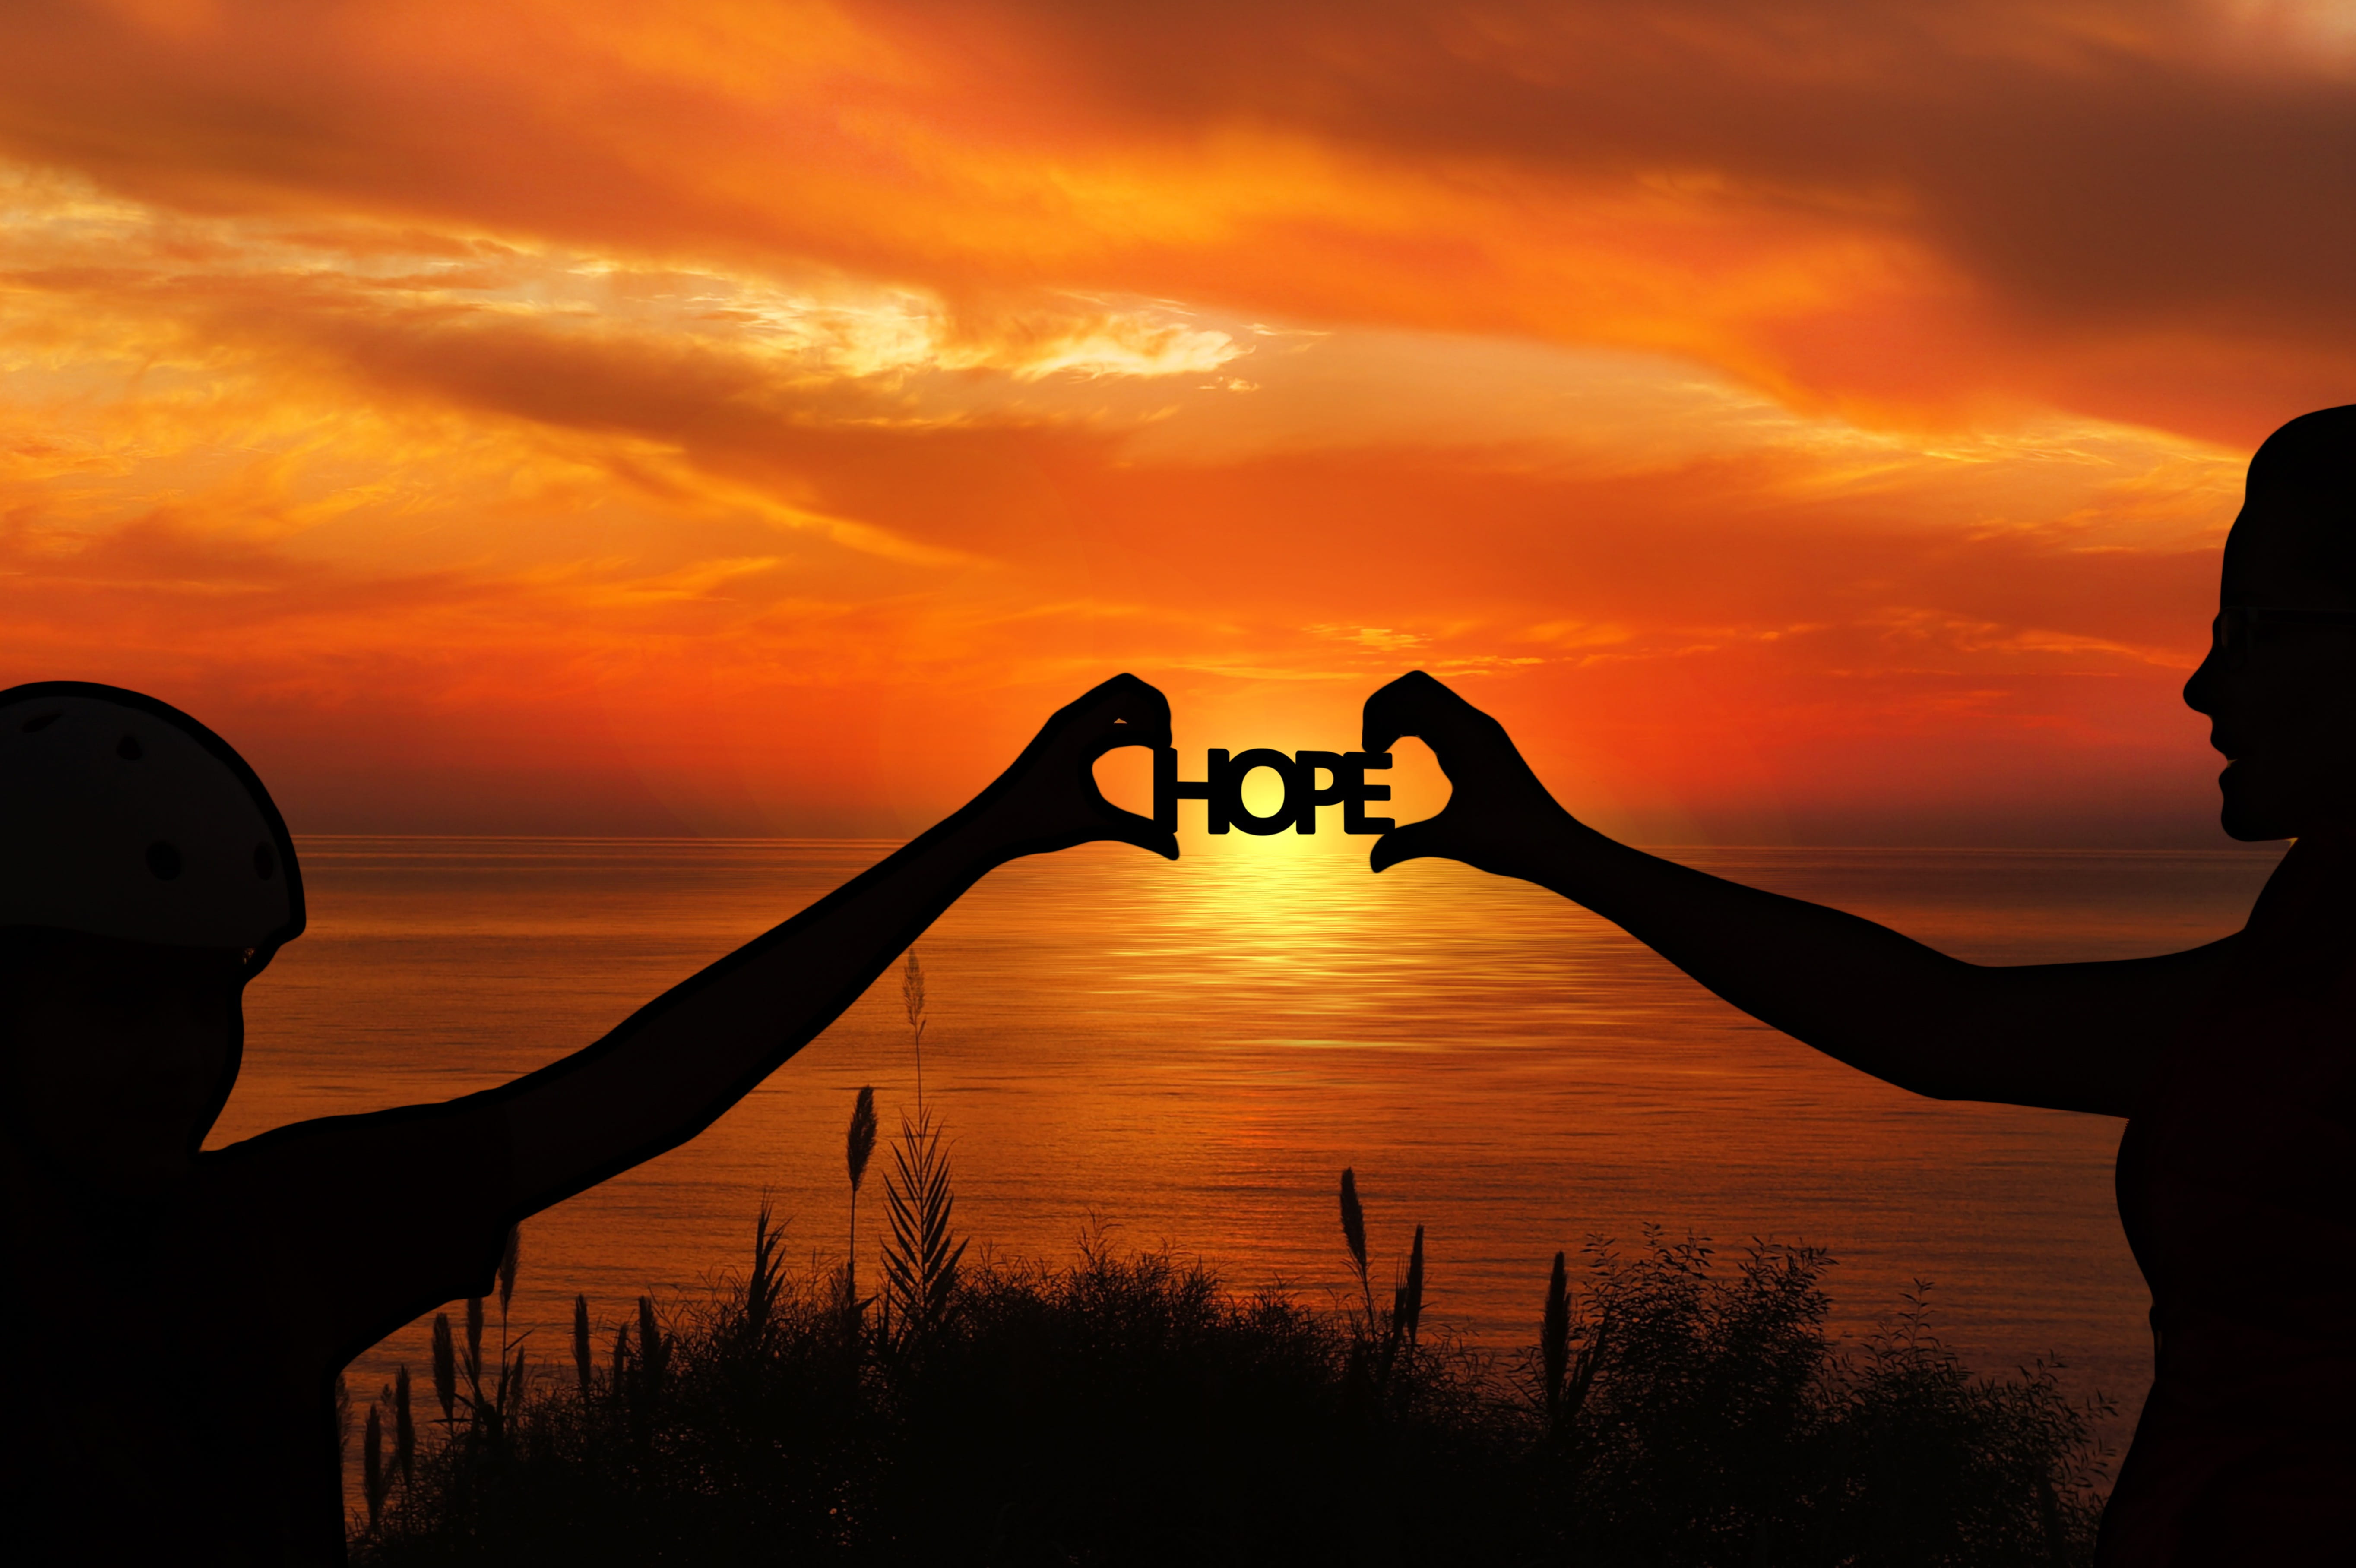 silhouette of people holding HOPE logo during sunset, forward